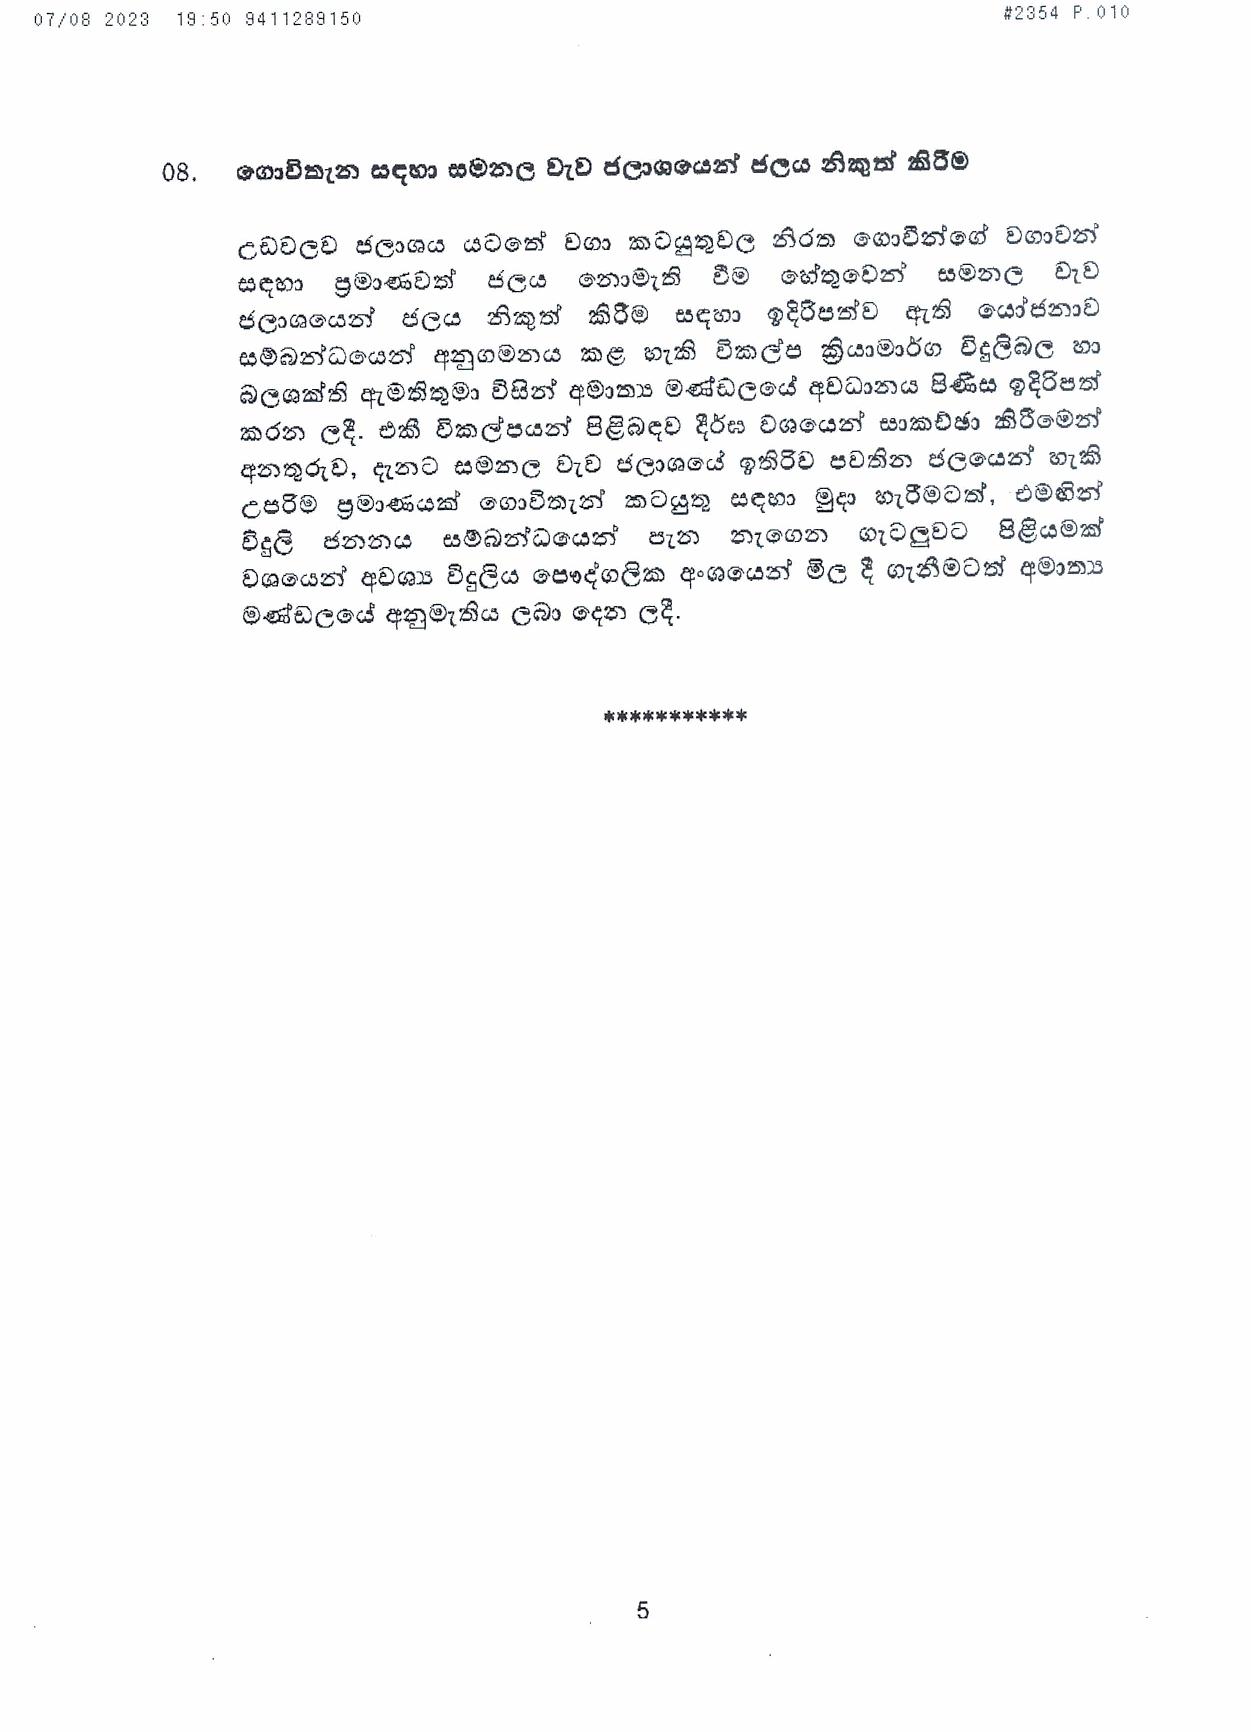 Cabinet Decision on 07.08.2023 page 005